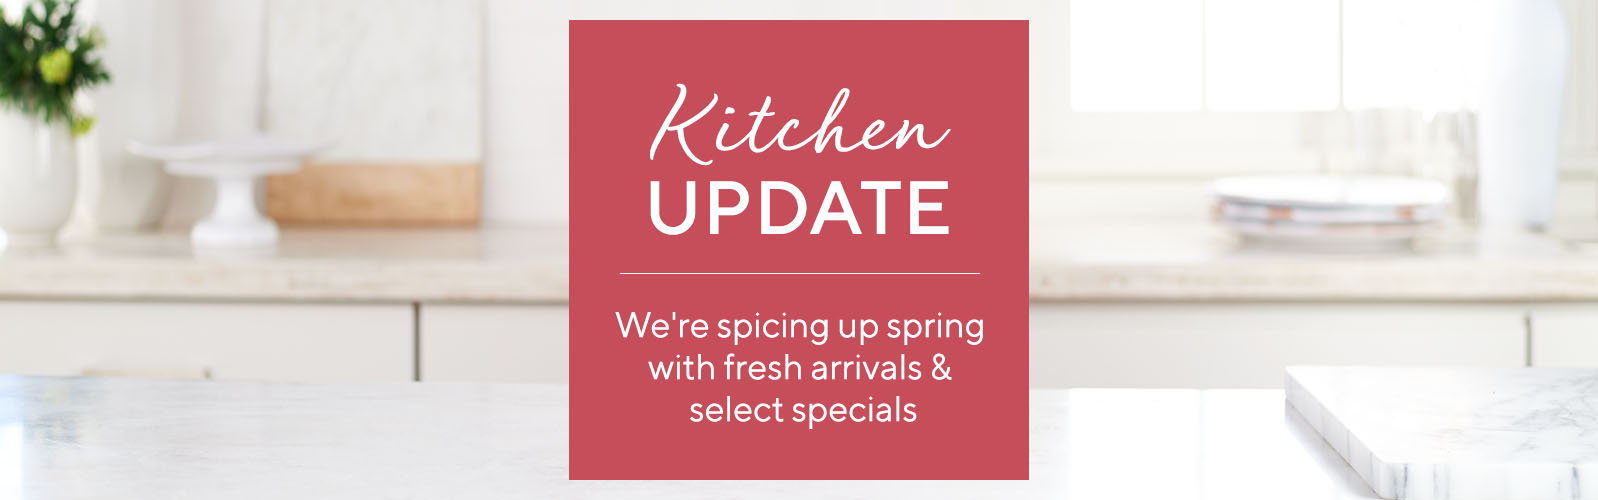 Kitchen Update - We're spicing up spring with fresh arrivals & select specials